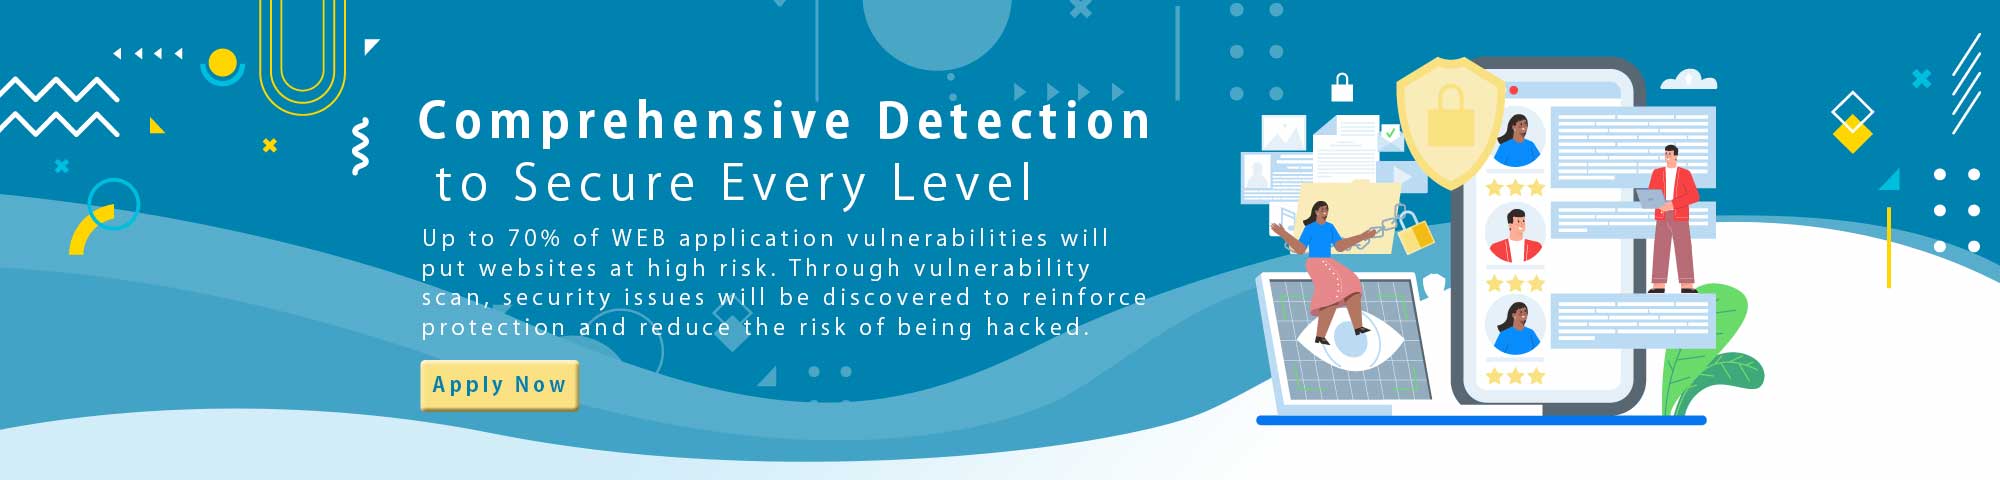 Comprehensive detection to secure every level